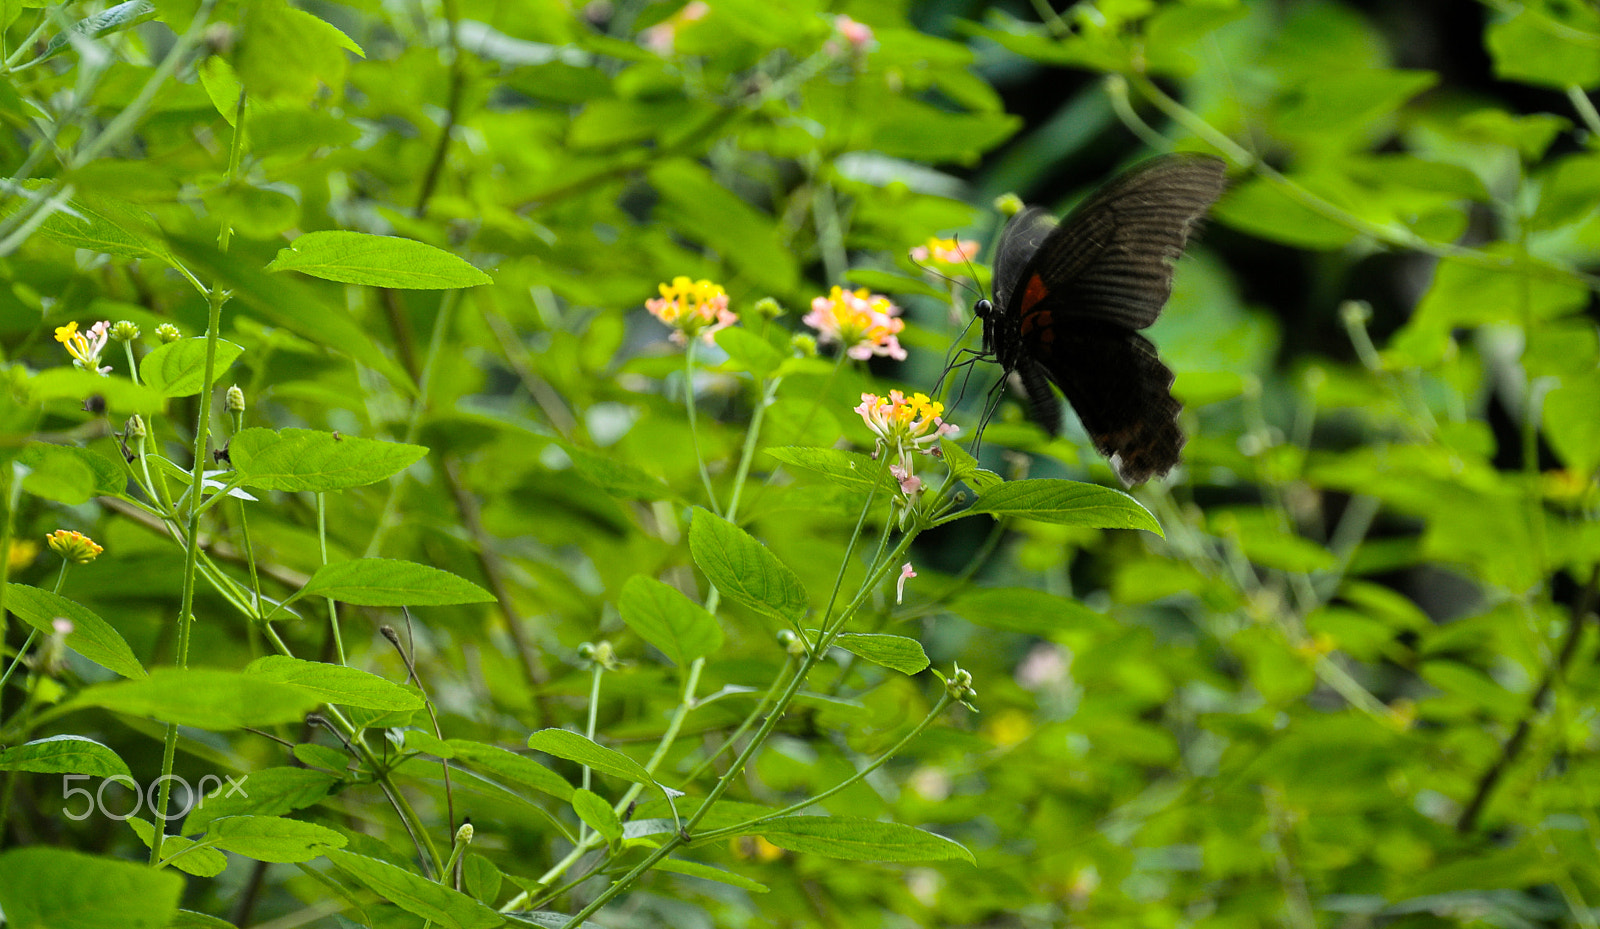 Nikon 1 J1 sample photo. A lunch of a black butterfly photography